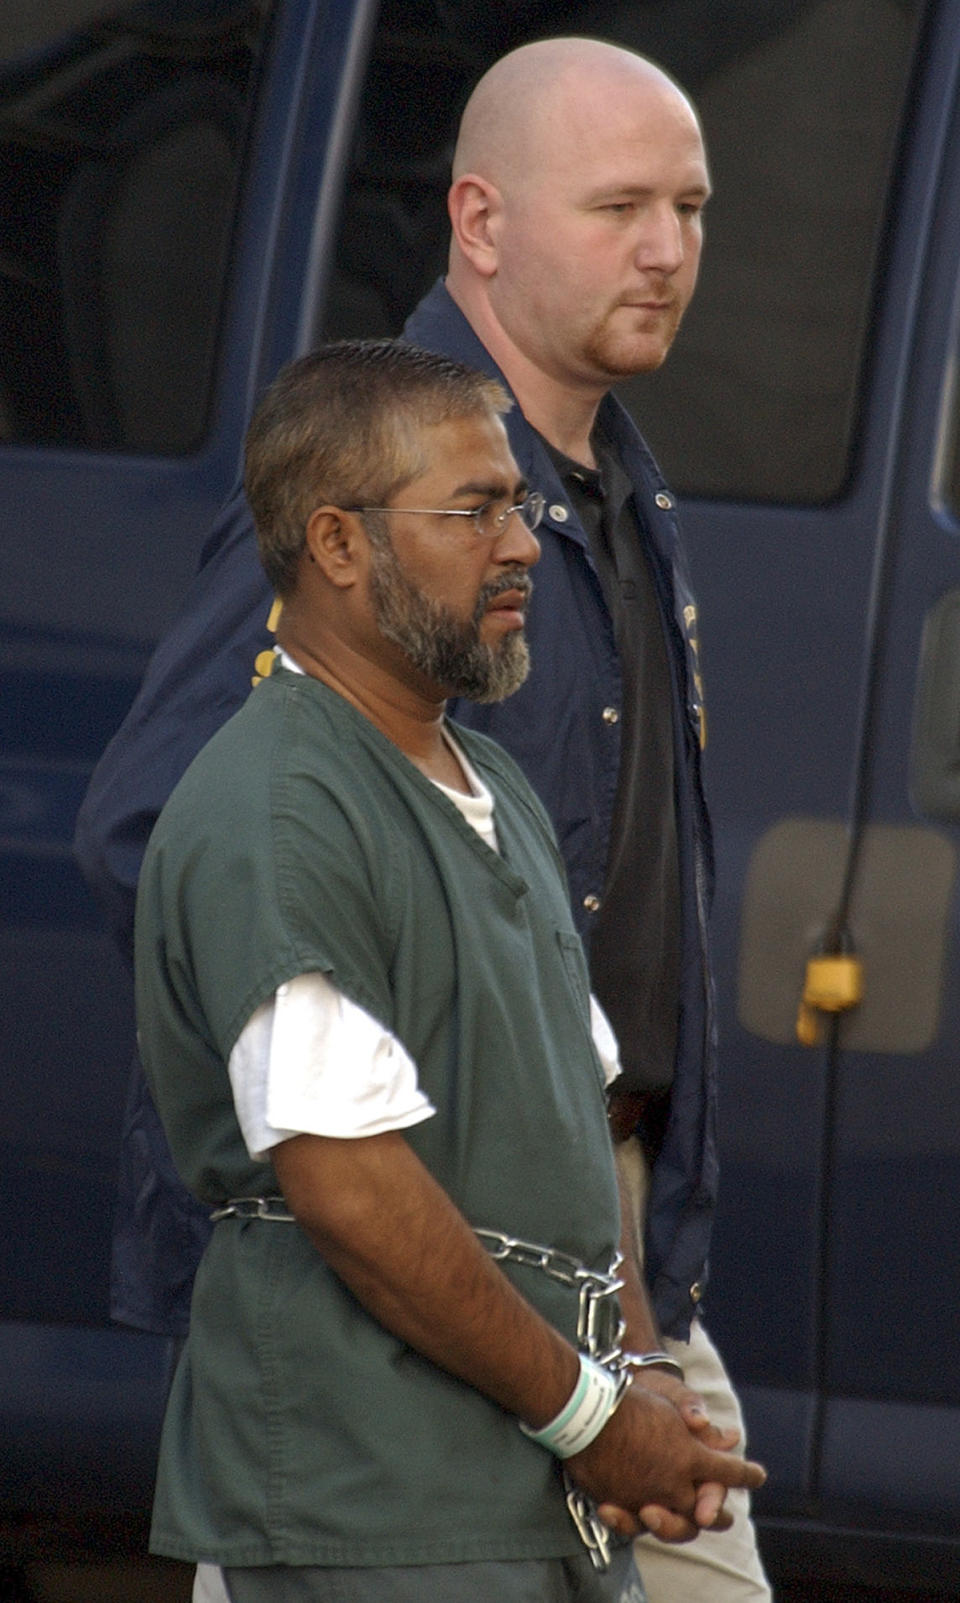 FILE - Mohammed Hossain, foreground, is escorted out of the Federal Building by a U.S. Federal Marshal, Tuesday, Aug. 24, 2004, in Albany, N.Y. The government sting was launched in the anxious years after 9/11 to catch potential terrorists. But critics accused FBI agents of using a manipulative informant to ensnare people. In a scathing ruling, a judge last week said the "real lead conspirator was the United States." (AP Photo/Jim McKnight, FILE)